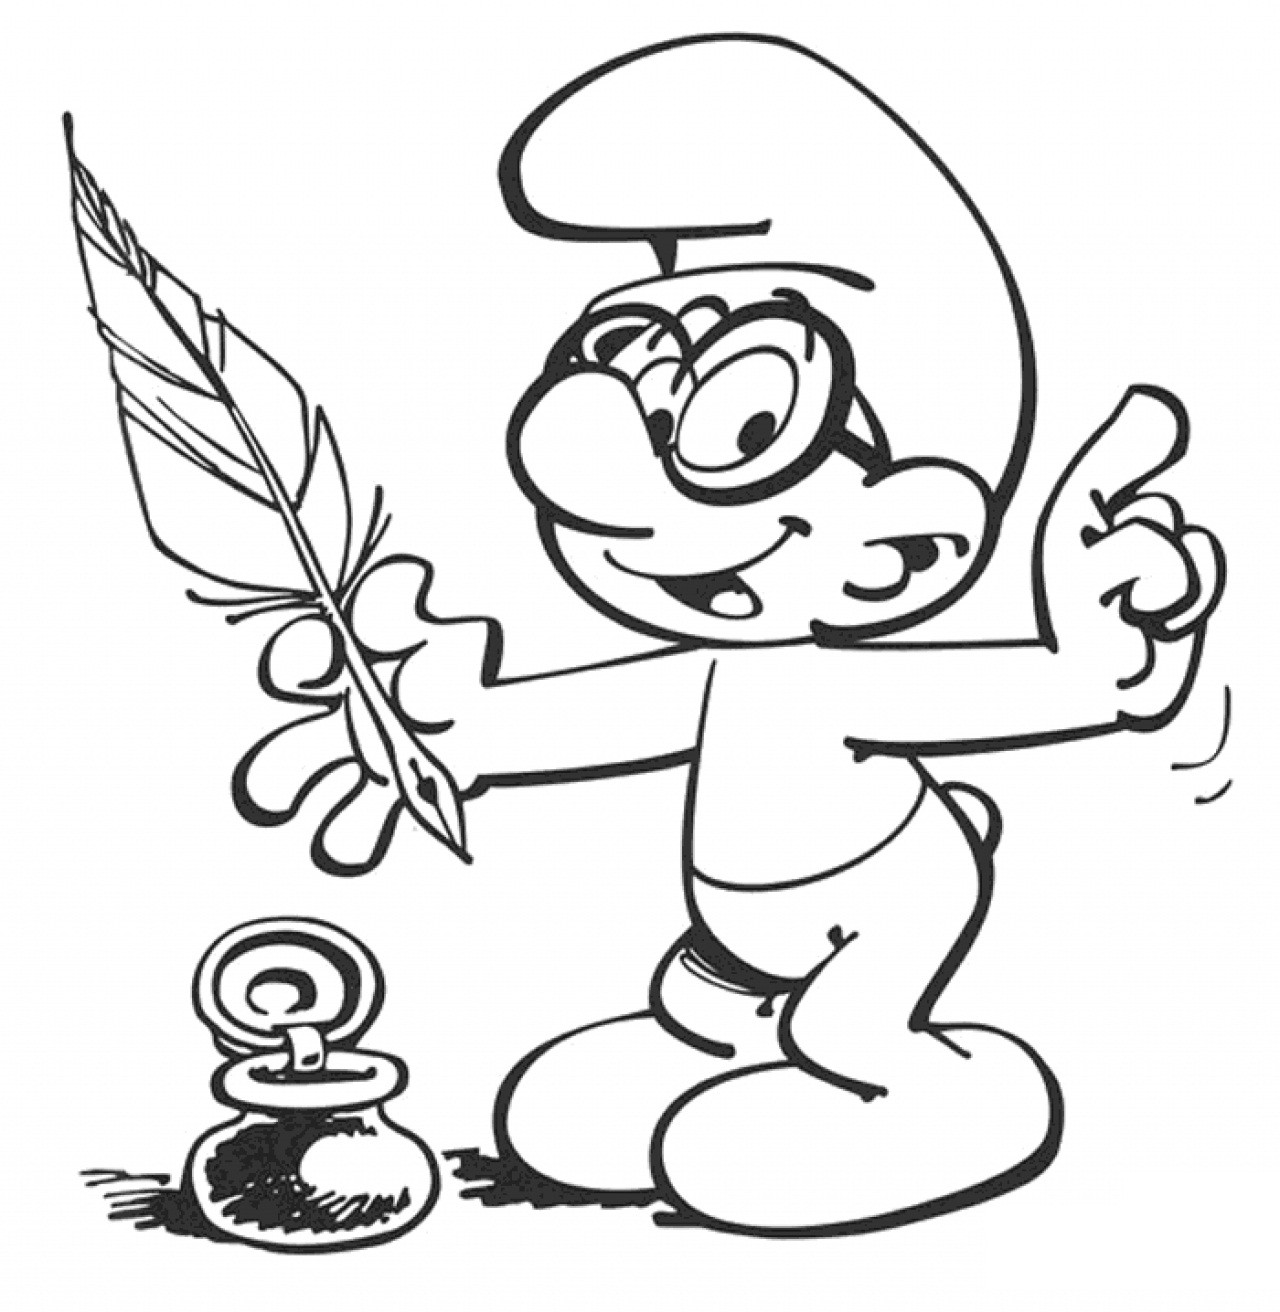 20 Best Smurf Coloring Pages.